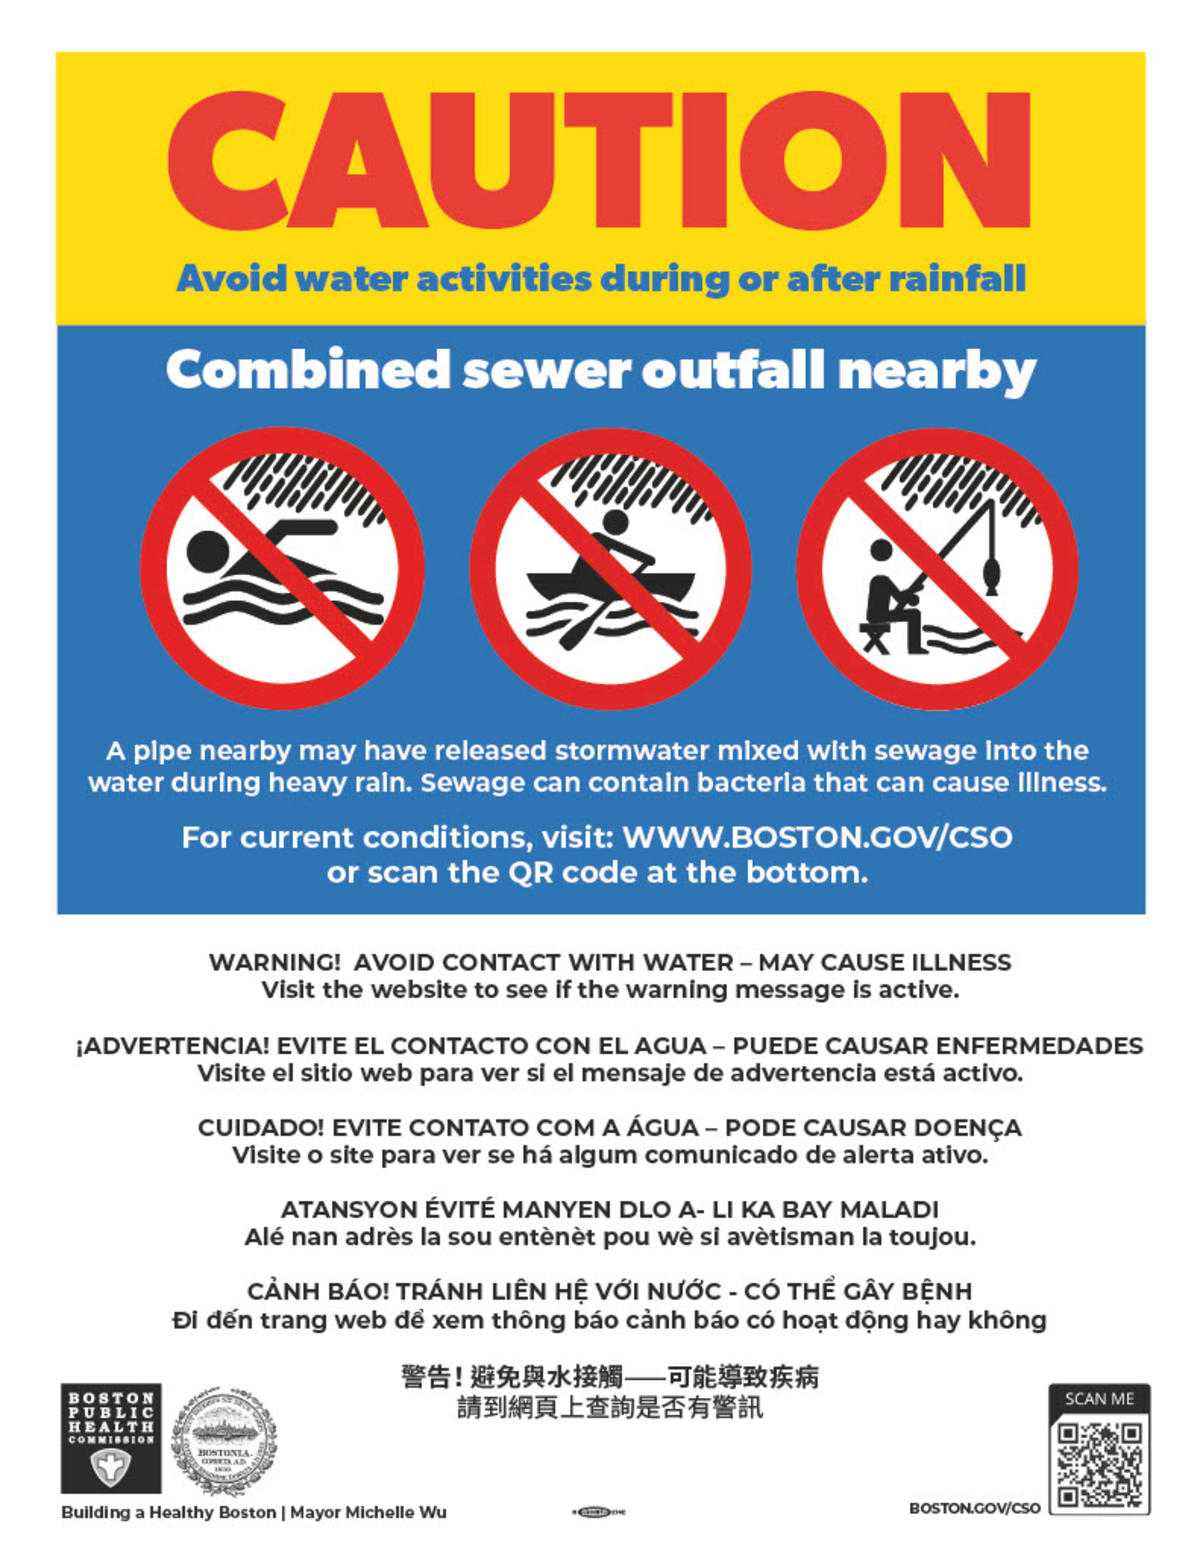 Caution: Avoid water activities during or after rainfall. Combined sewer outfall nearby. A pipe nearby may have released stormwater mixed with sewage into the water during heavy rain. Sewage can contain bacteria that can cause illness